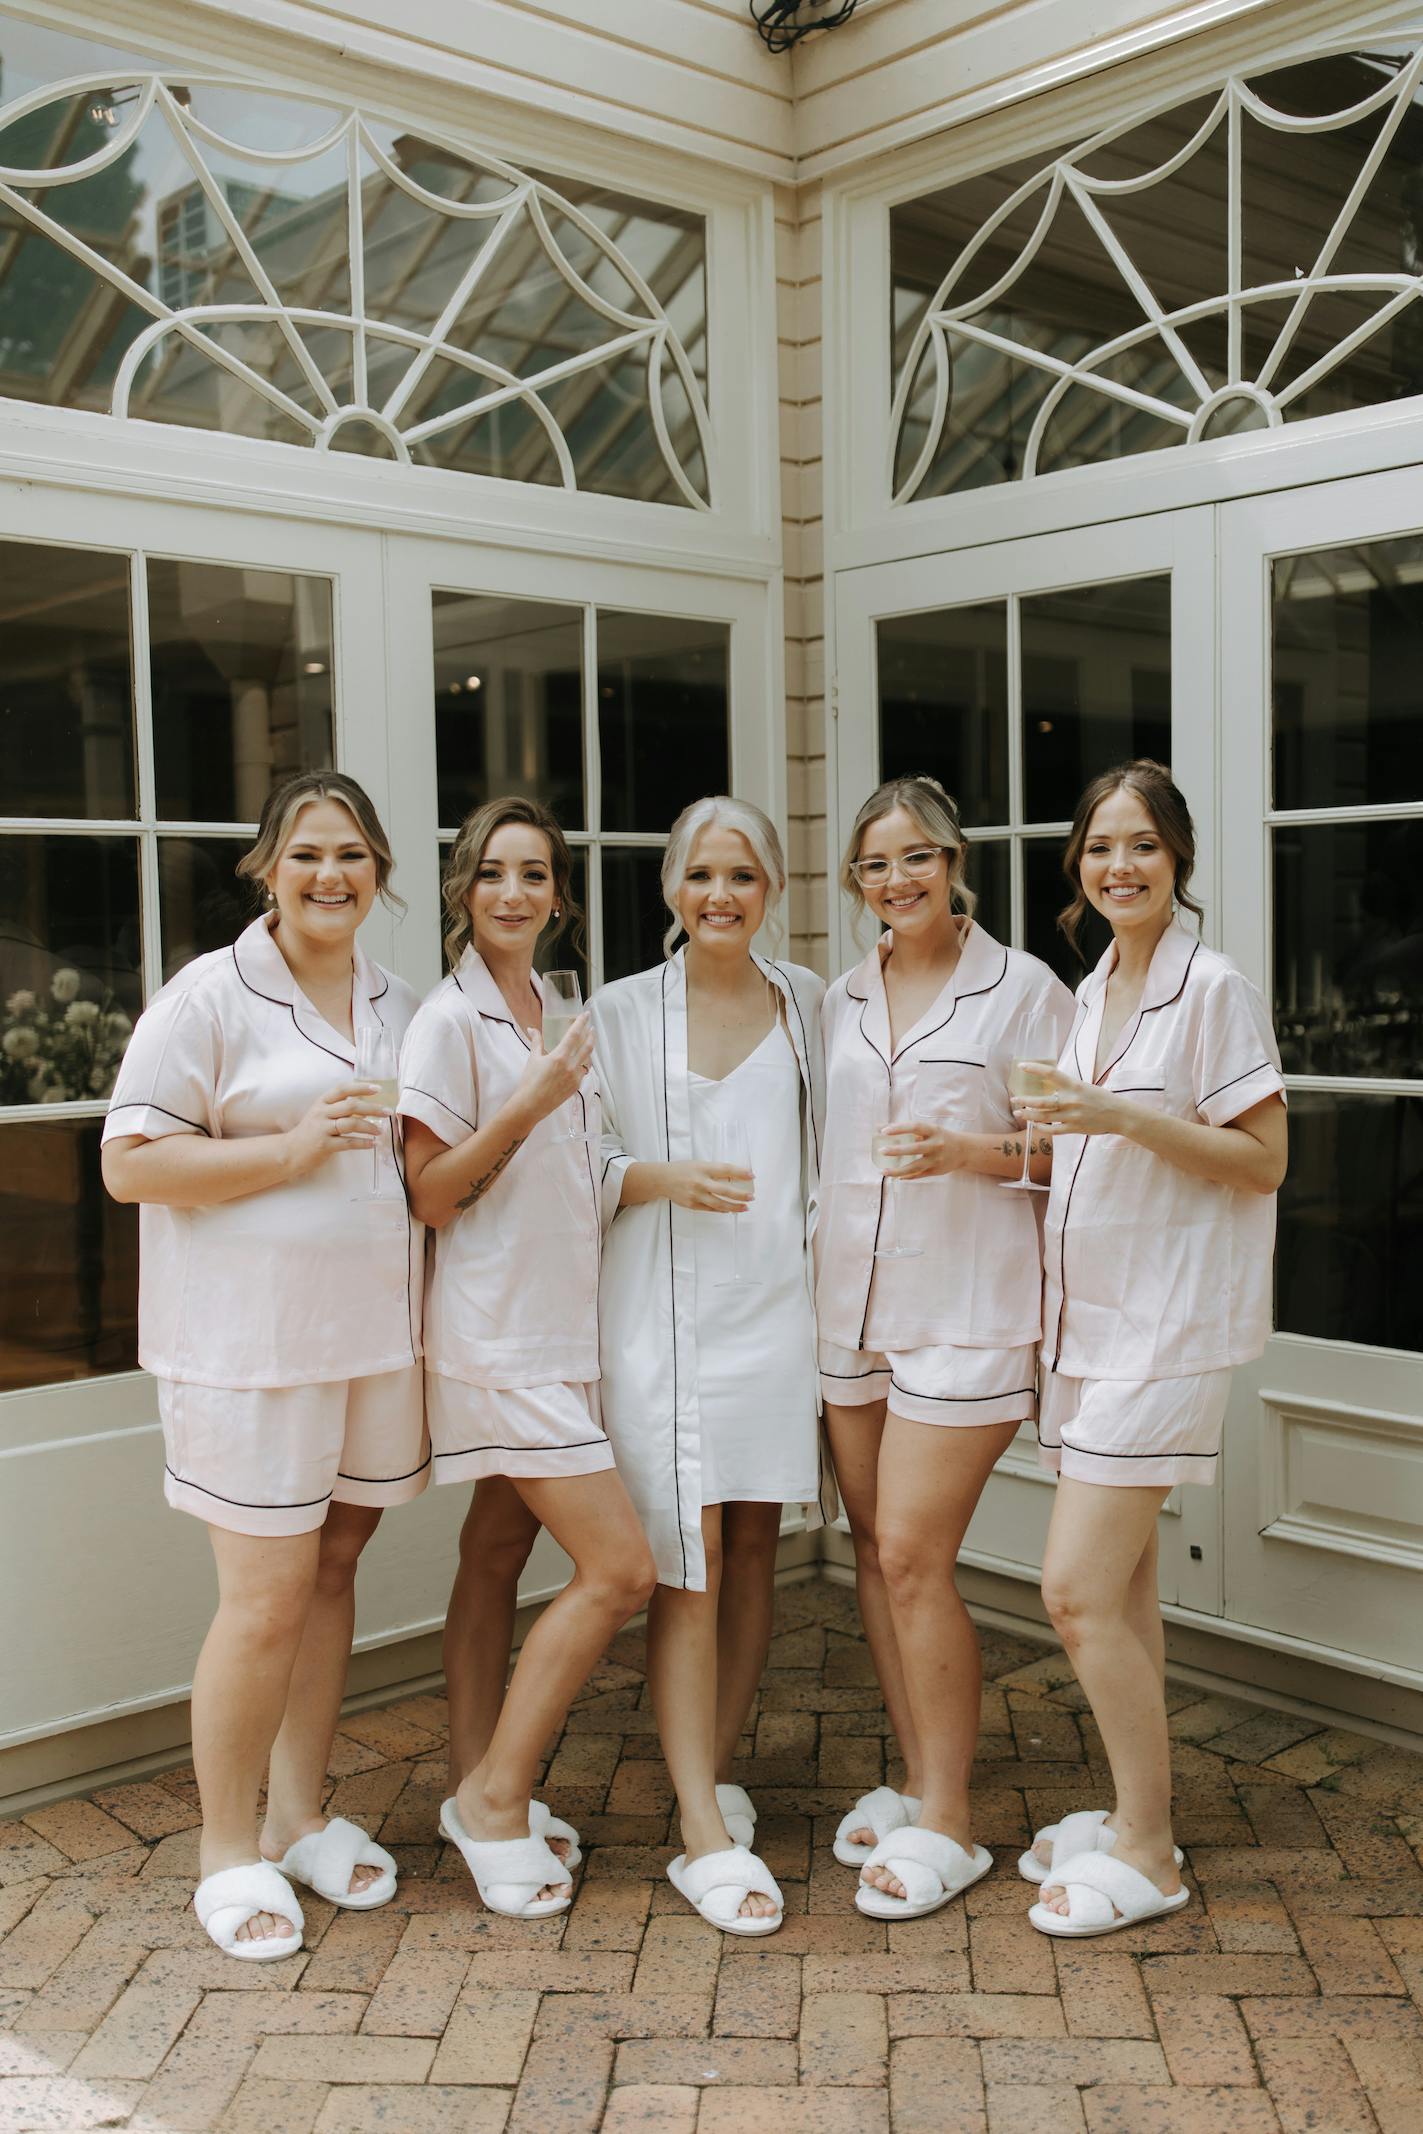 A group of five women wearing matching light pink pajamas and white slippers stand together, smiling and holding champagne glasses. One woman in the center is dressed in a white robe and slippers. Behind them is a building with large windows.